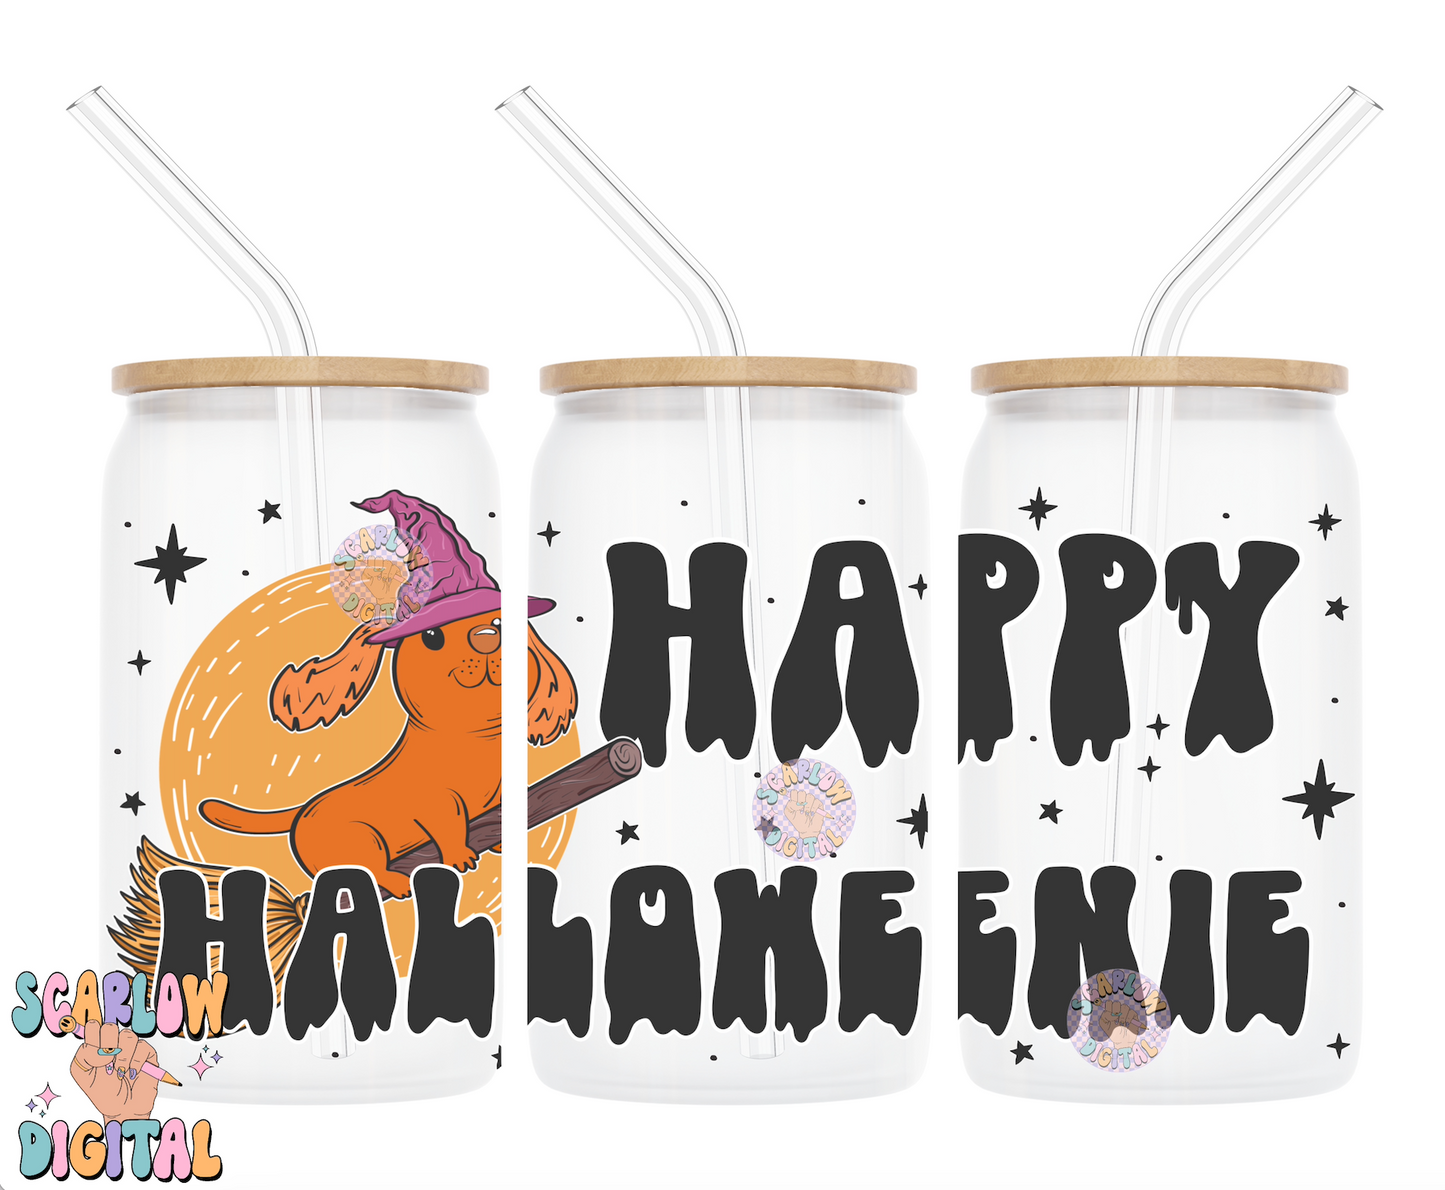 Happy Halloweenie 16 Ounce Can Glass Cup Wrap PNG Digital Design Download, dachshund cup wrap, witch cup wrap png, halloween png cup wrap